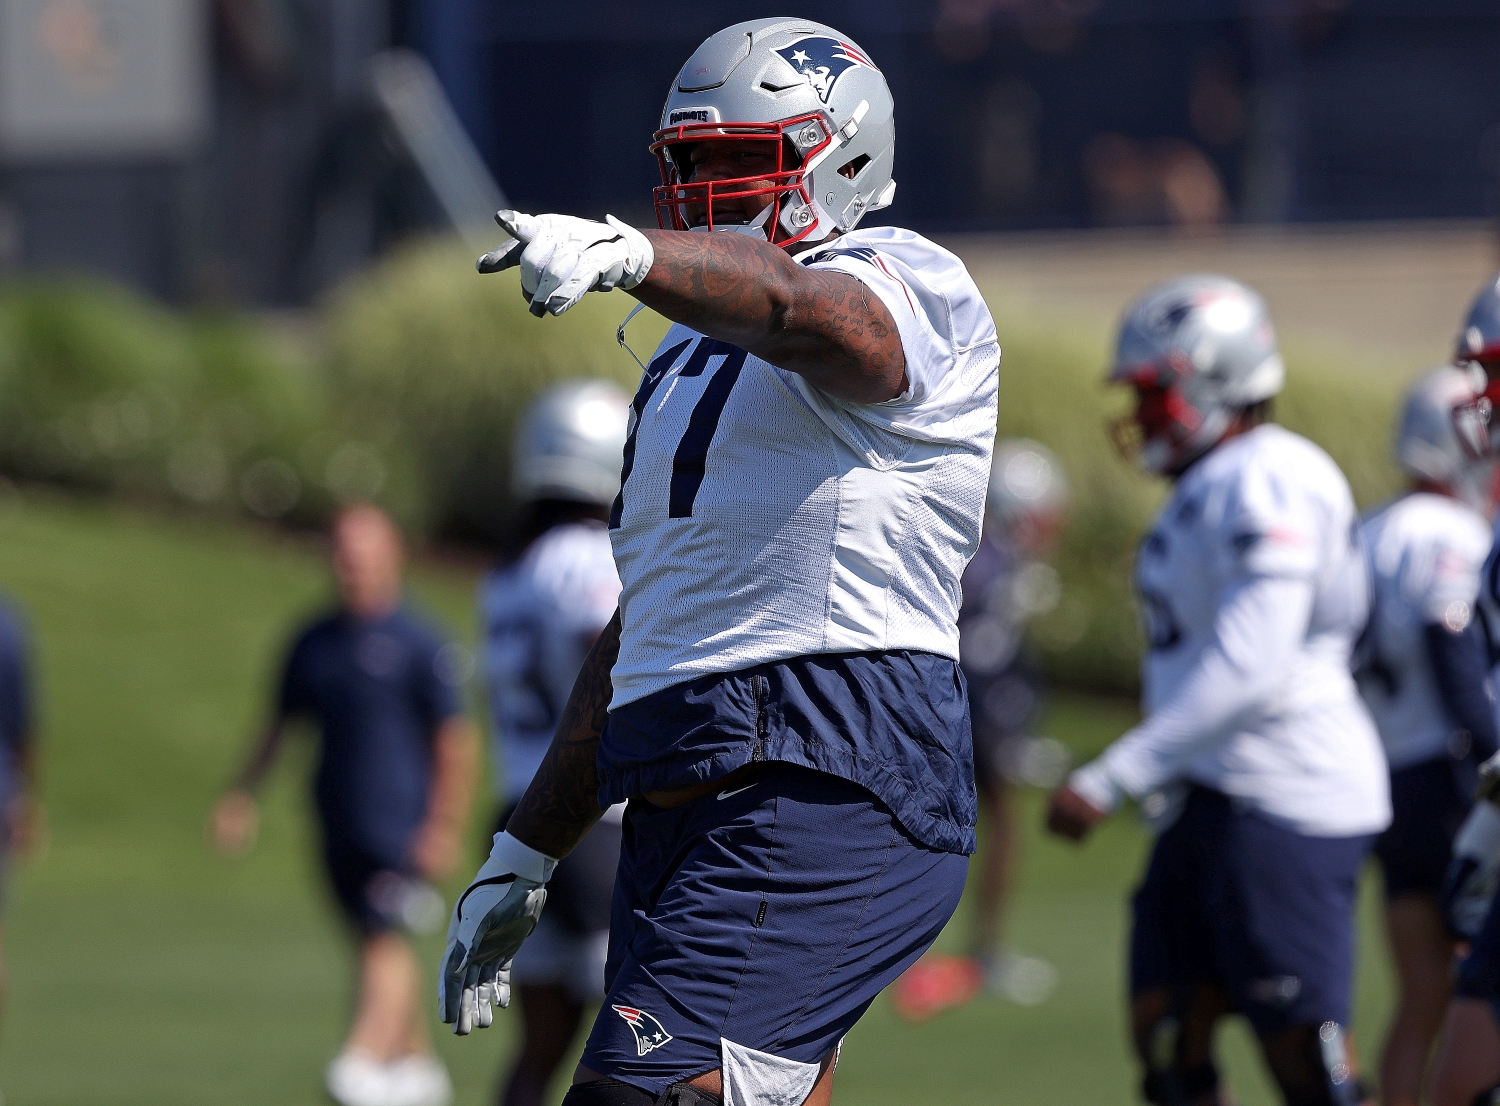 New England Patriots offensive tackle Trent Brown participating in training camp practice.